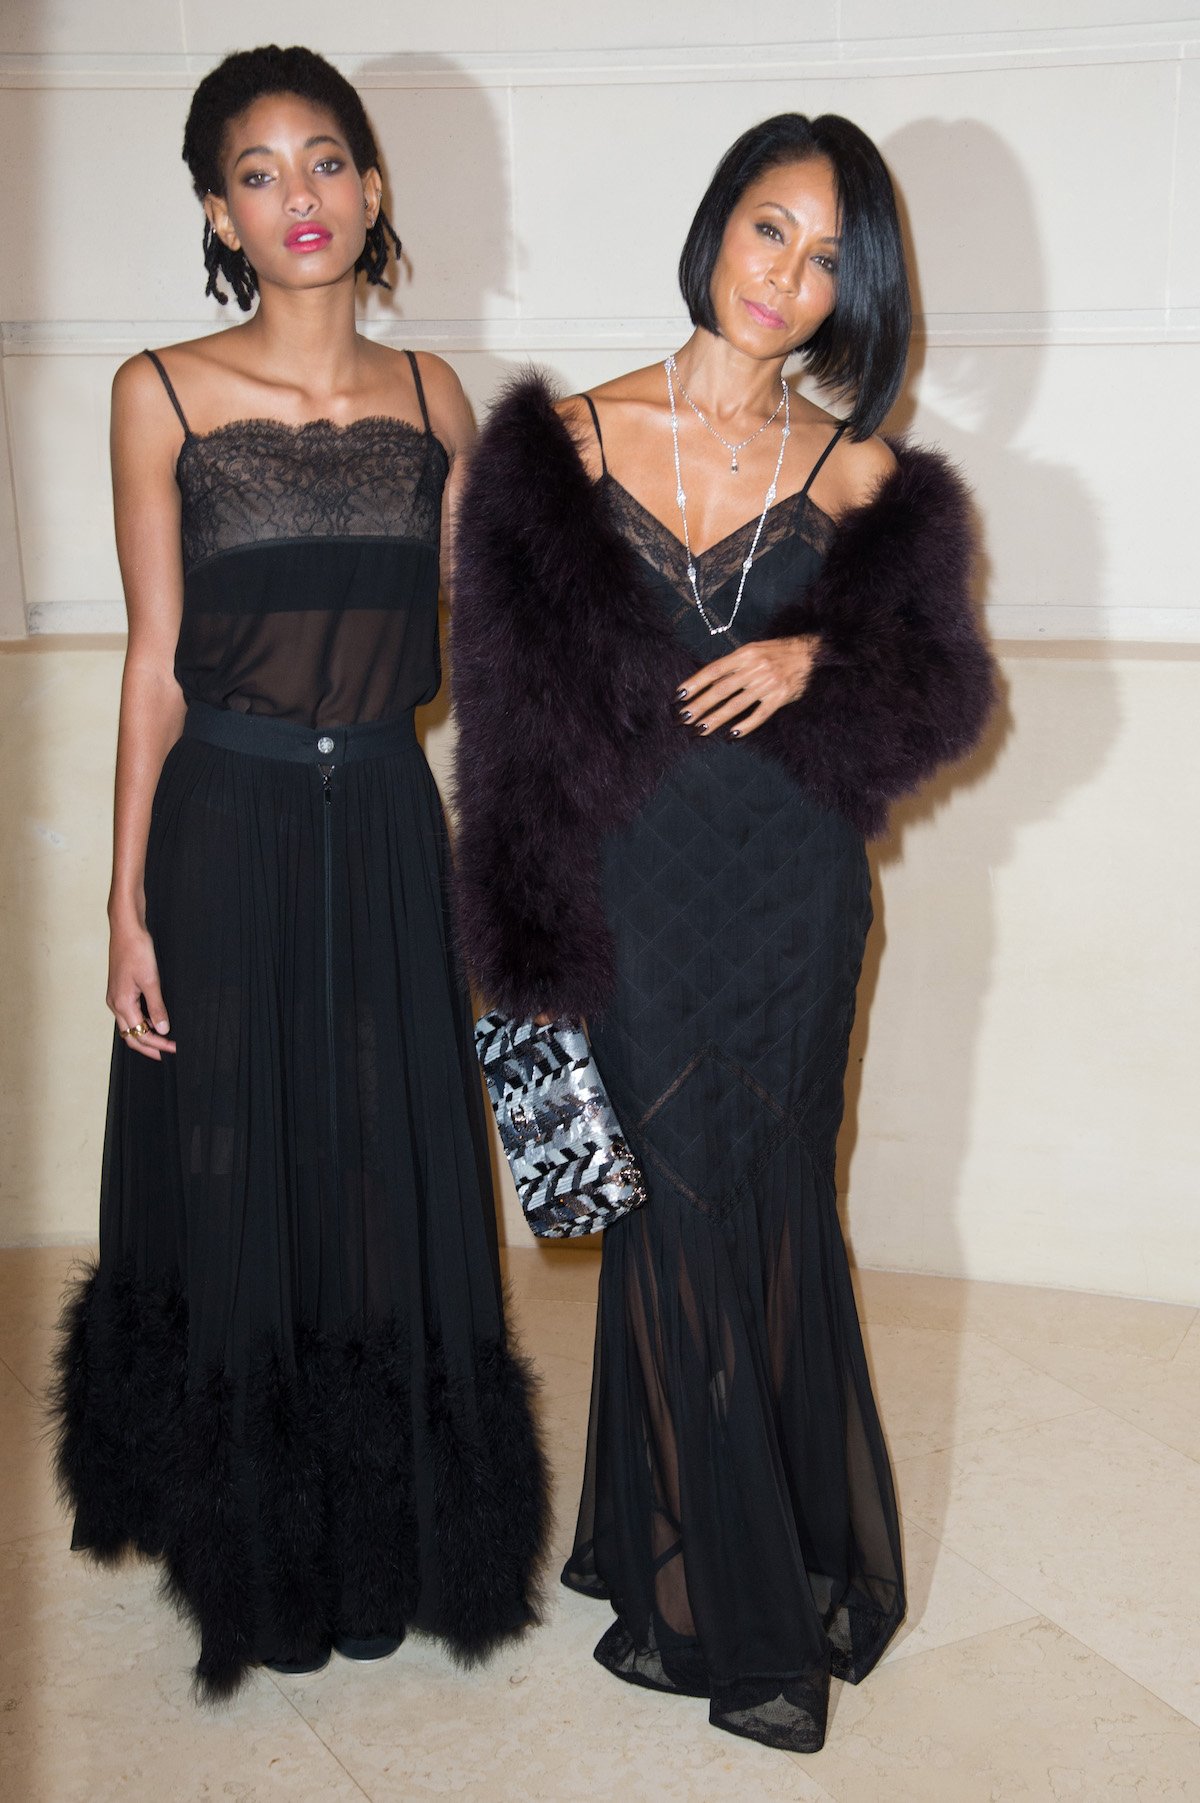 Willow Smith and her mother Jada Pinkett Smith pose together in matching black dresses at a event.